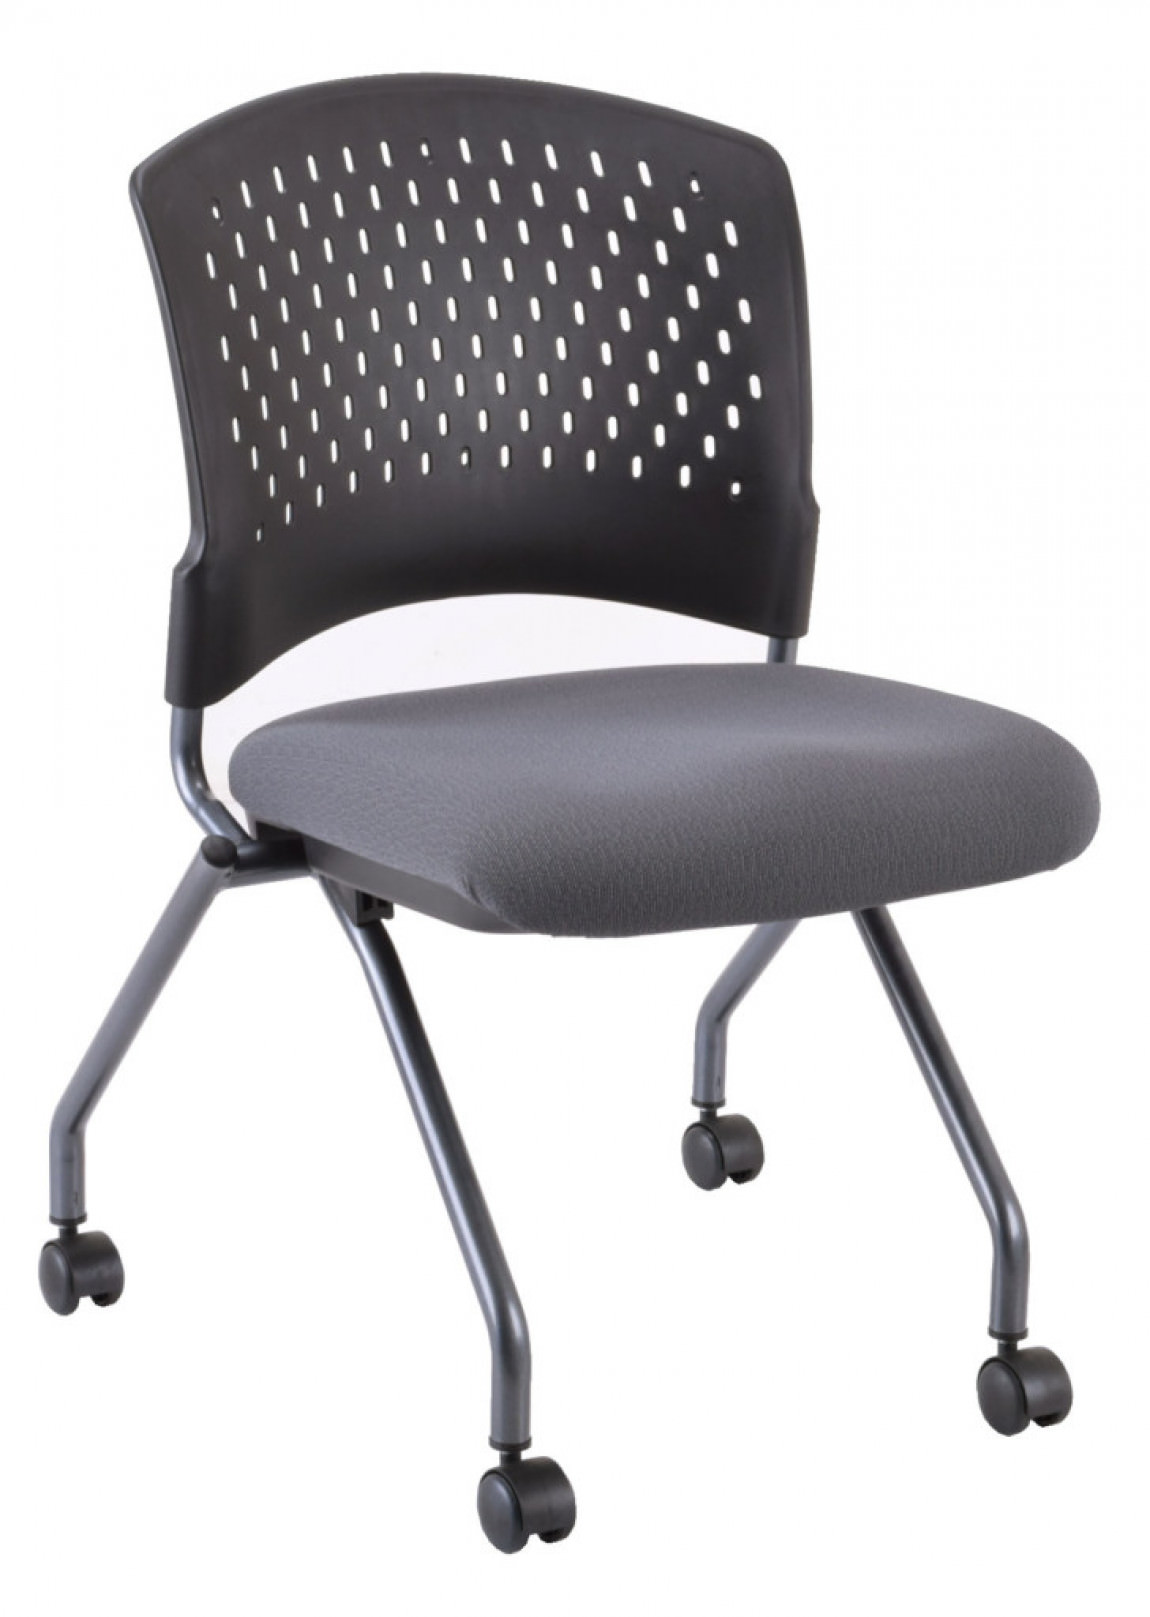 Heavy Duty Nesting Chair Without Arms, What Do You Call A Chair Without Arms